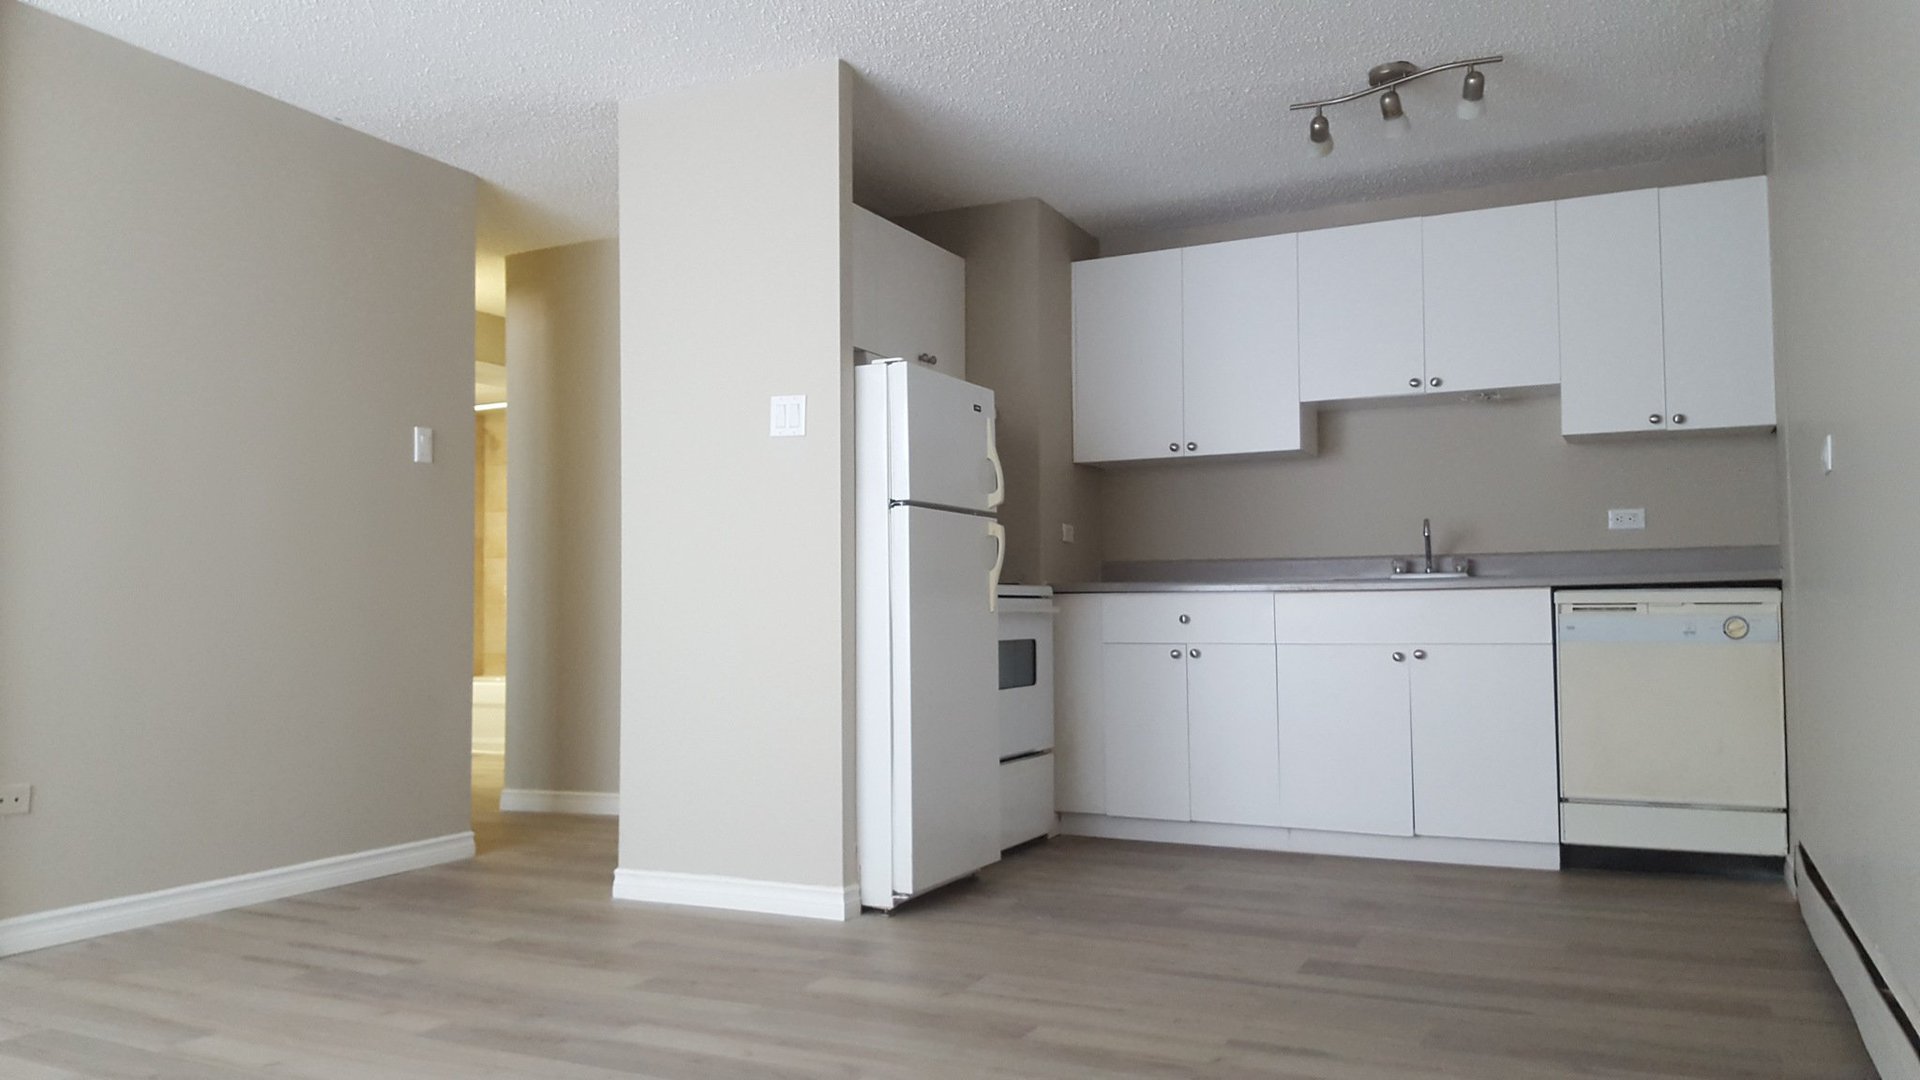 Apartment for rent at 211 14 Avenue SW, Calgary, AB. This is the kitchen. It has hardwood floor, dishwasher, radiator and refrigerator.